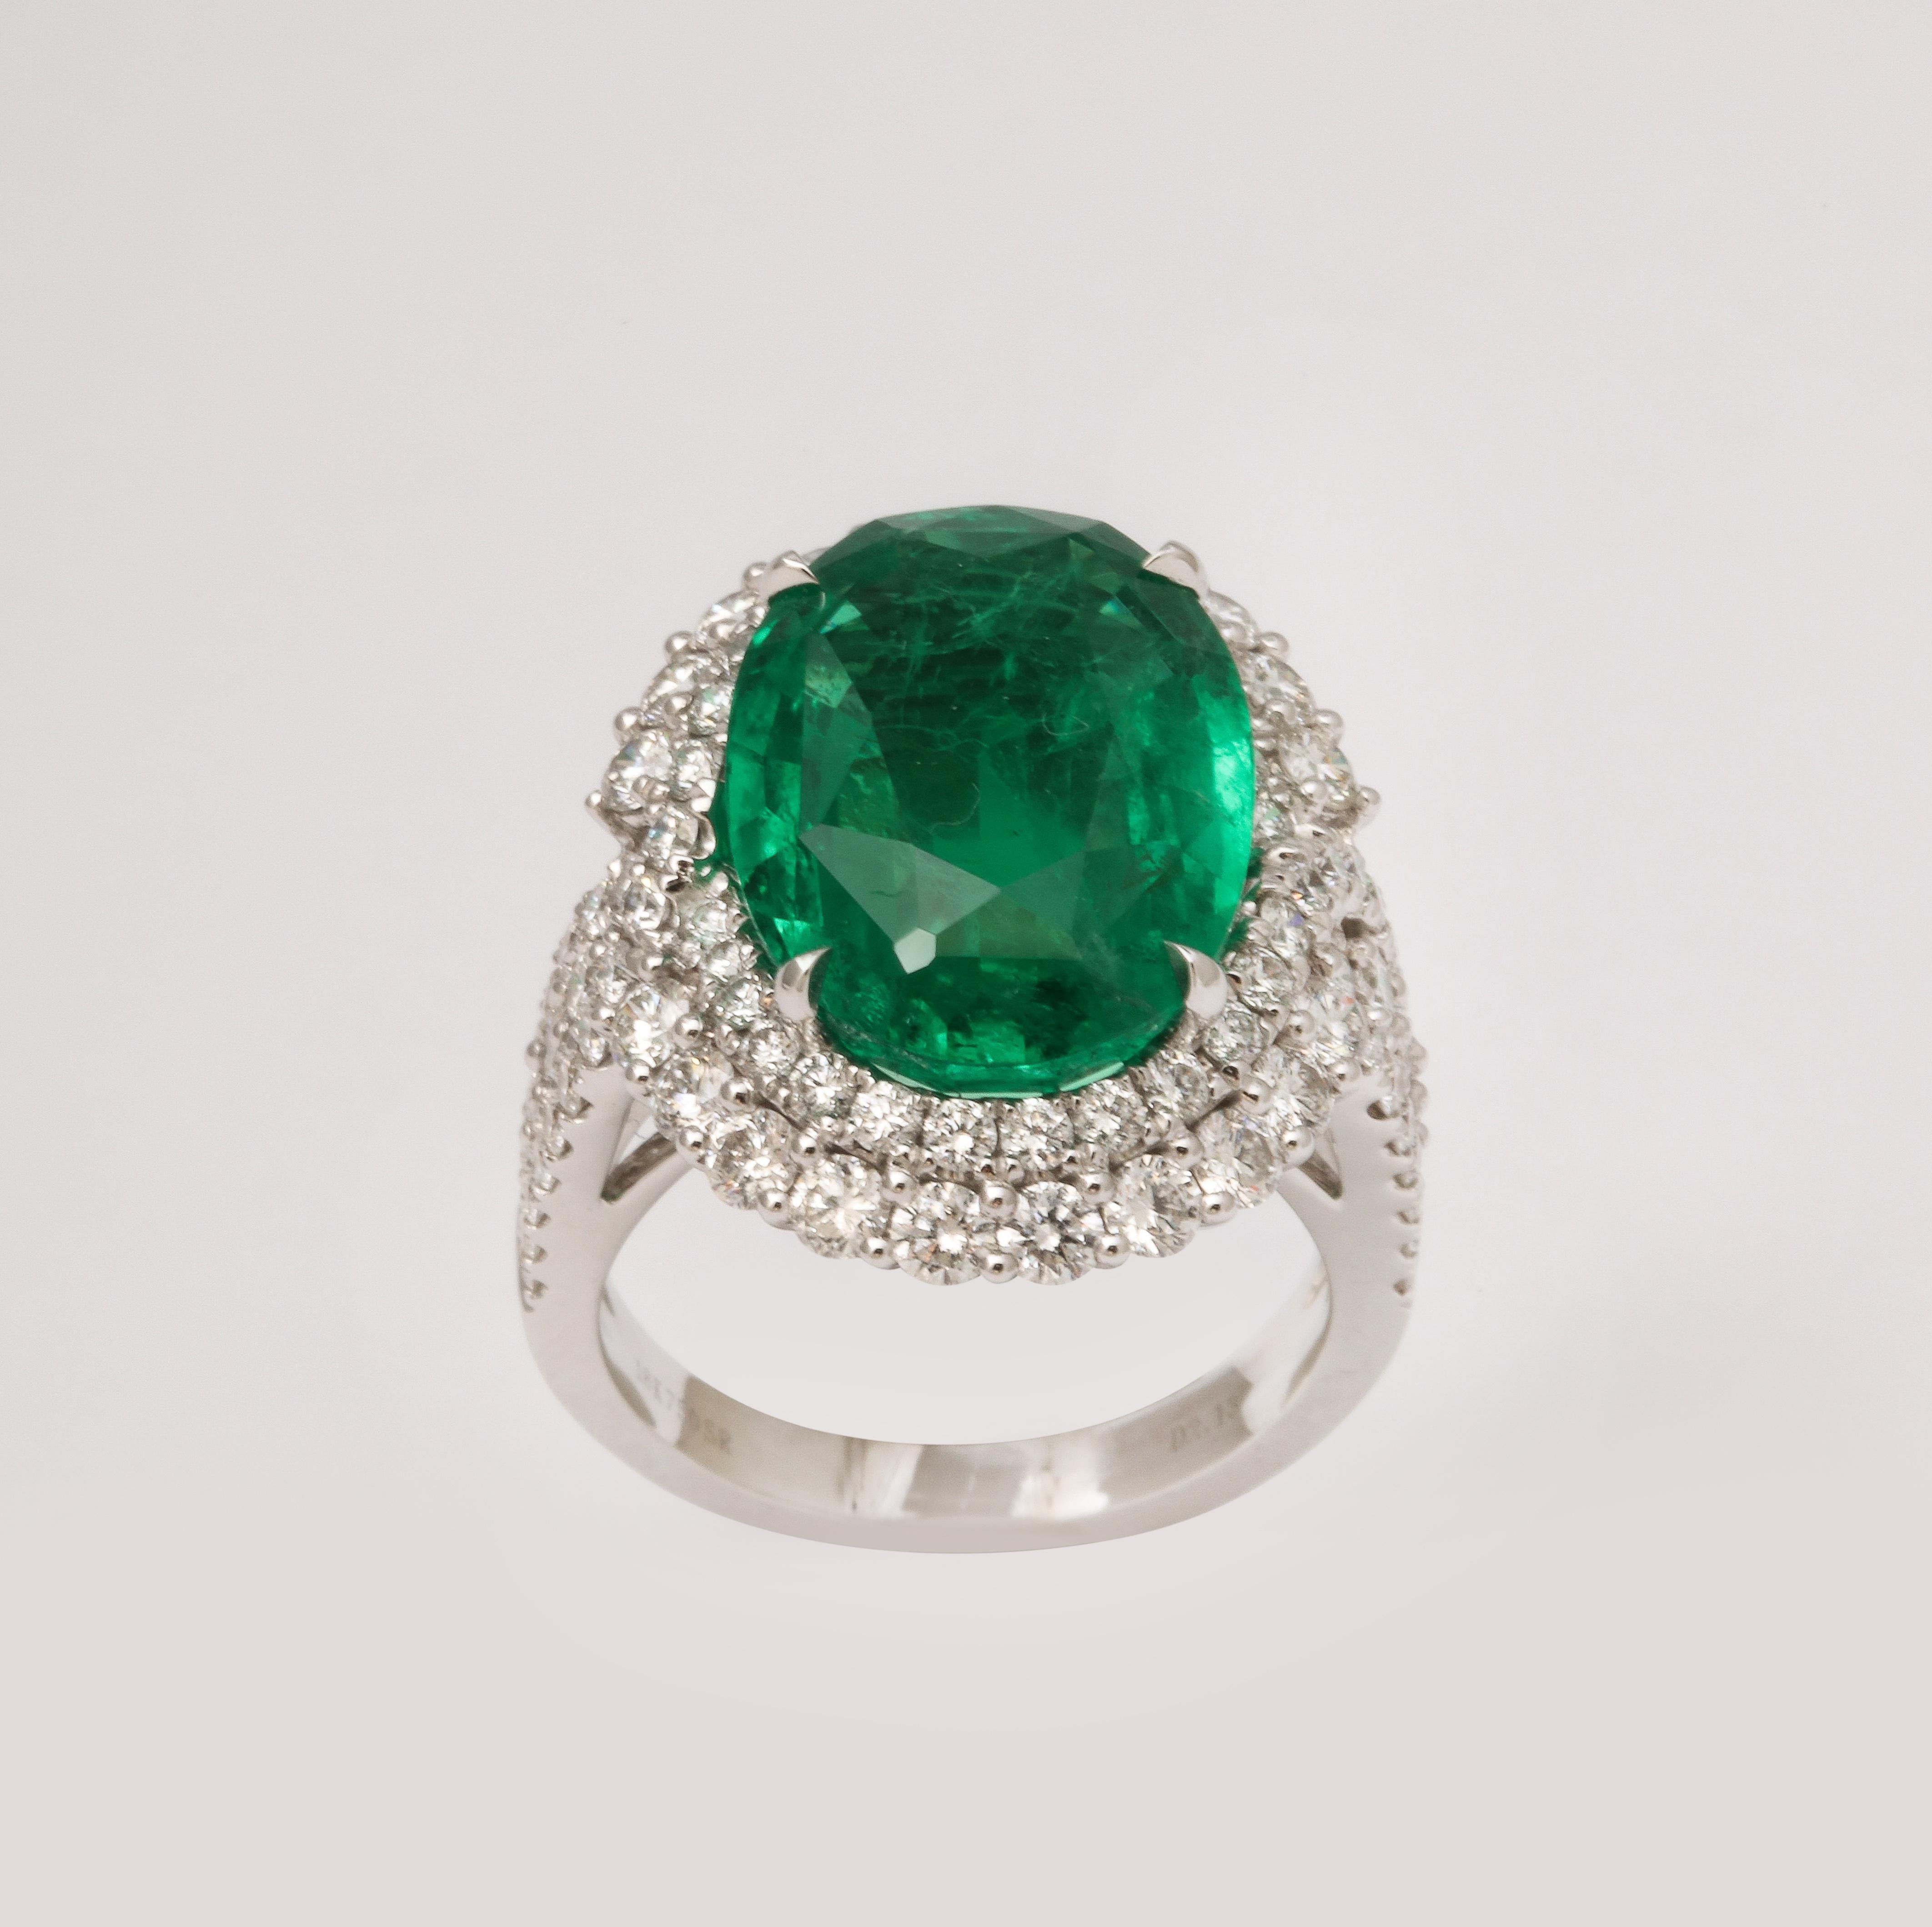 9 carat Vivid Green Emerald and Diamond Ring  For Sale 4